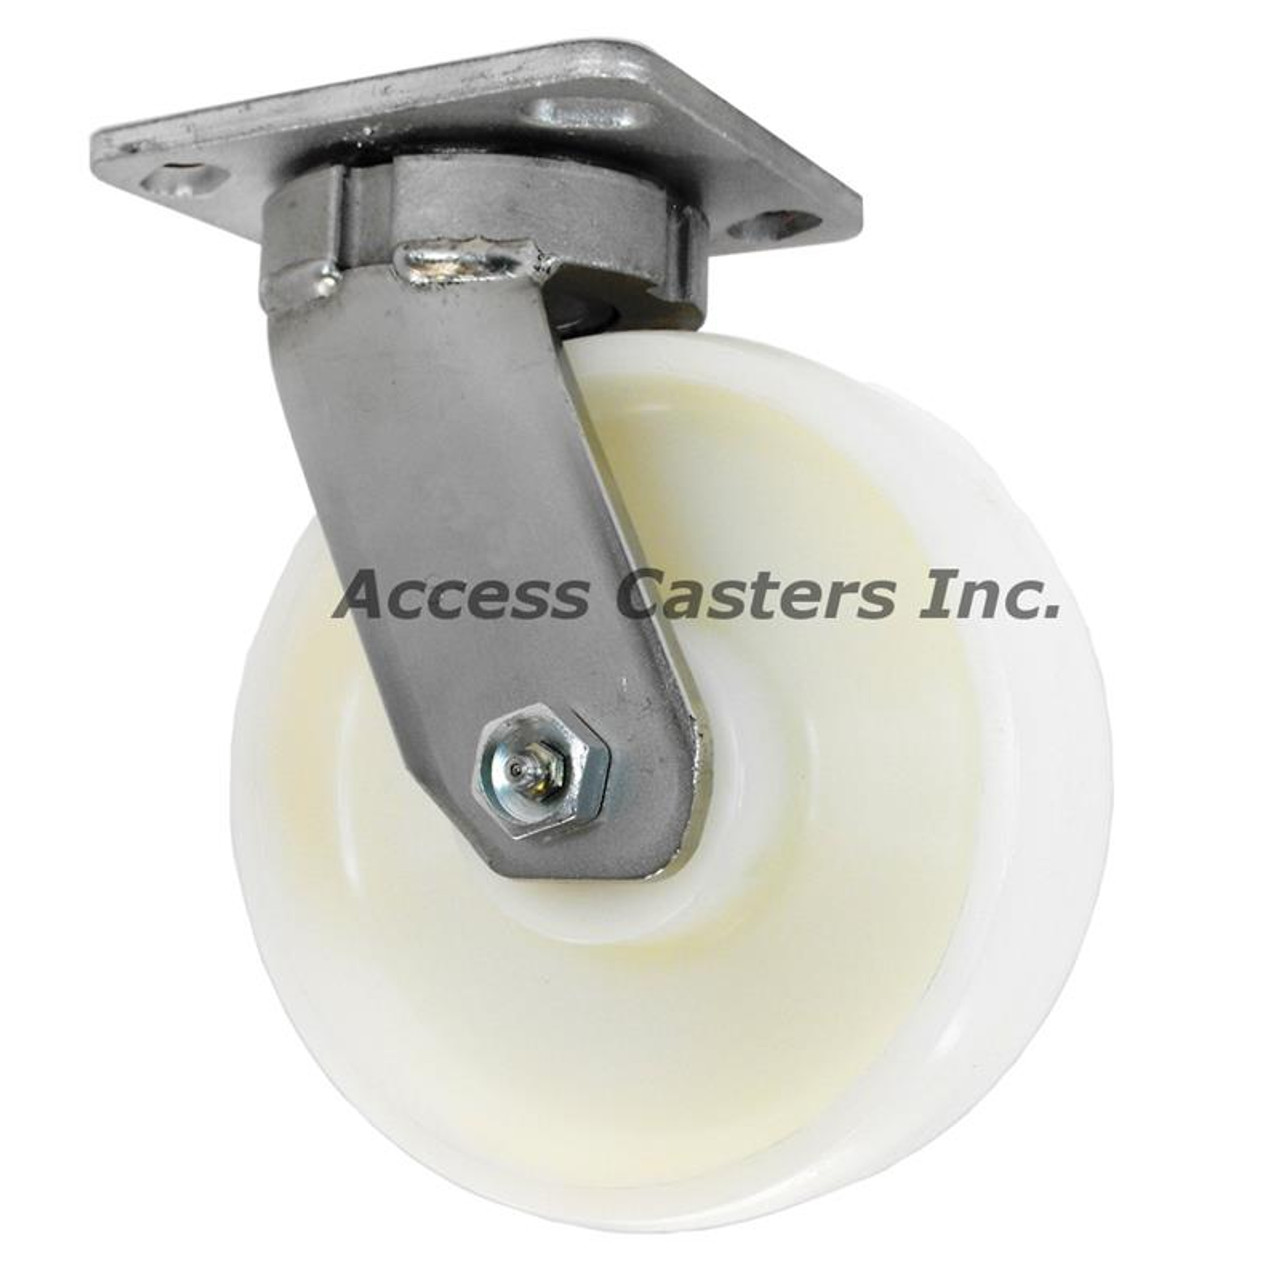 6" stainless steel kingpinless caster shown